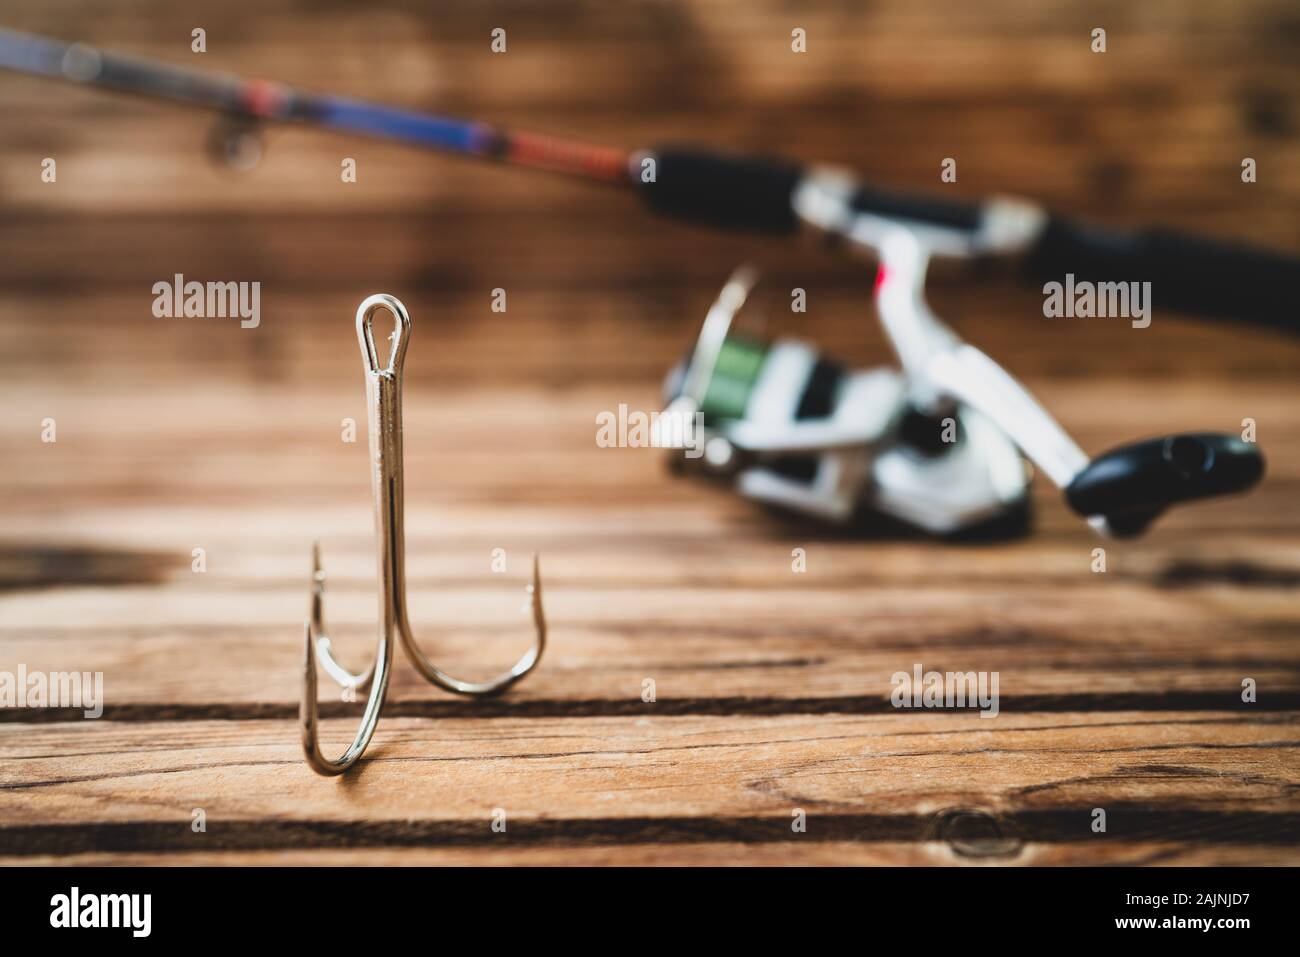 Preperation hook, tackle, pole and fishing equipment for a angling activity. Stock Photo